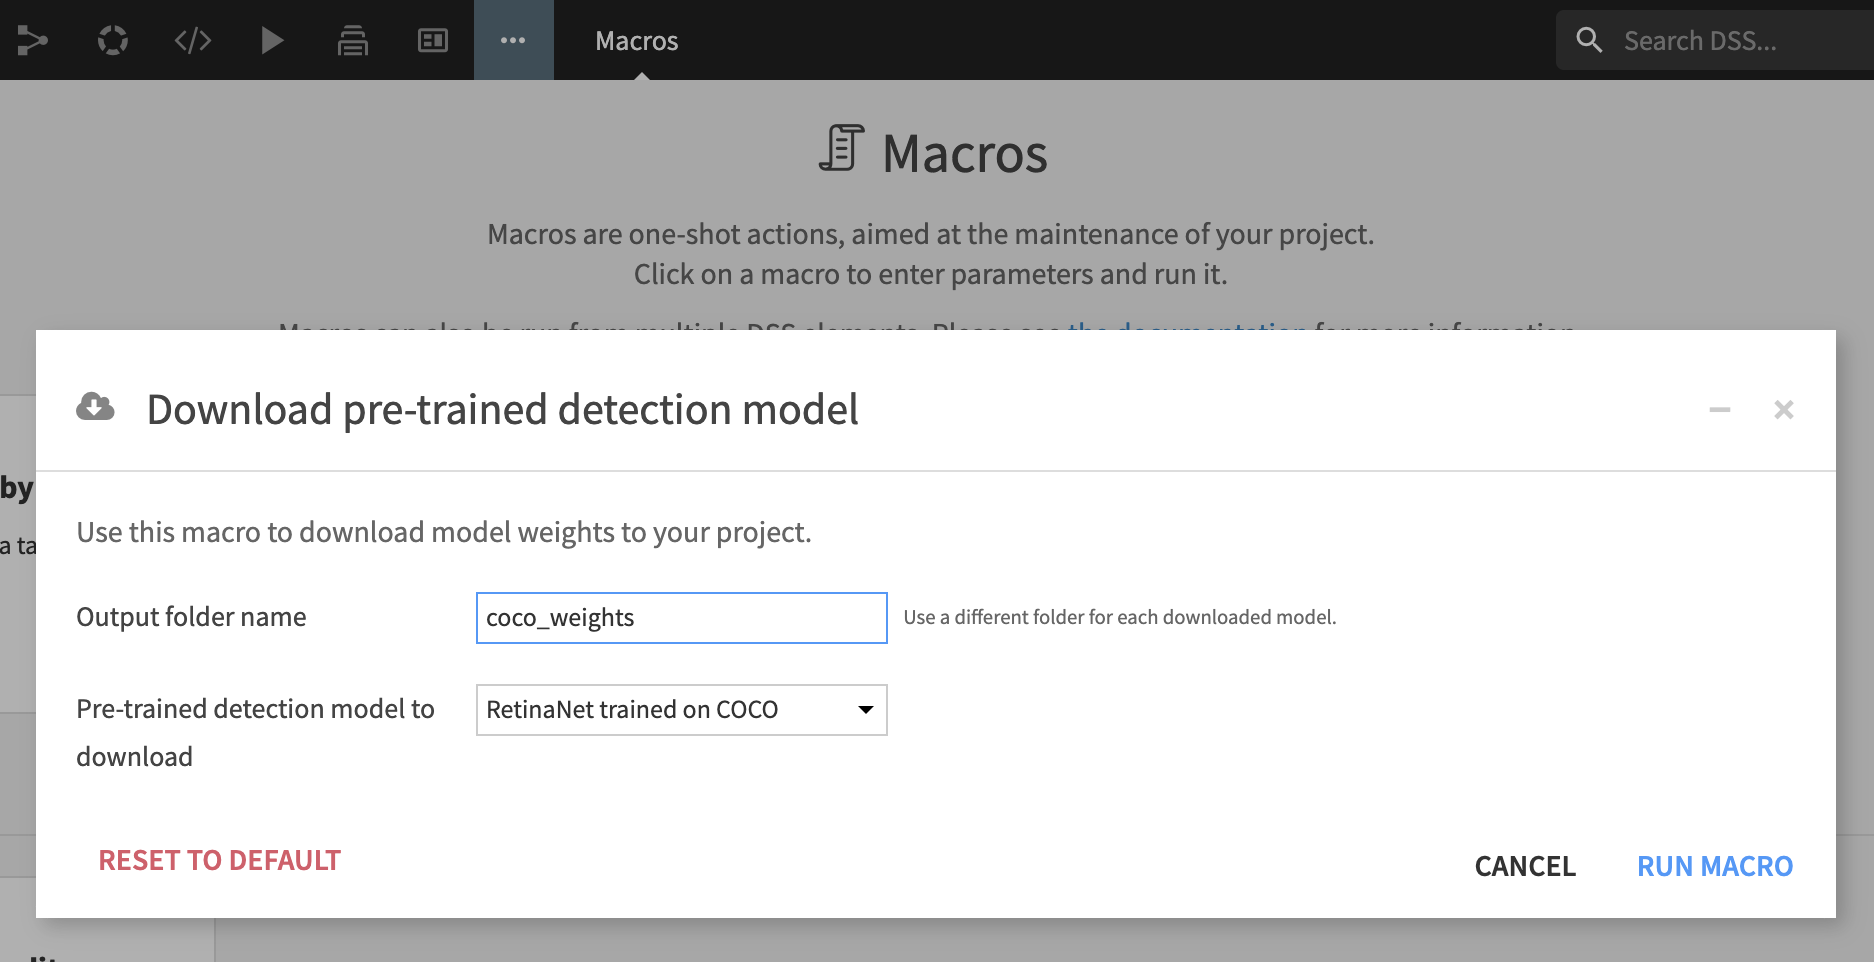 Download pre-trained detection model.